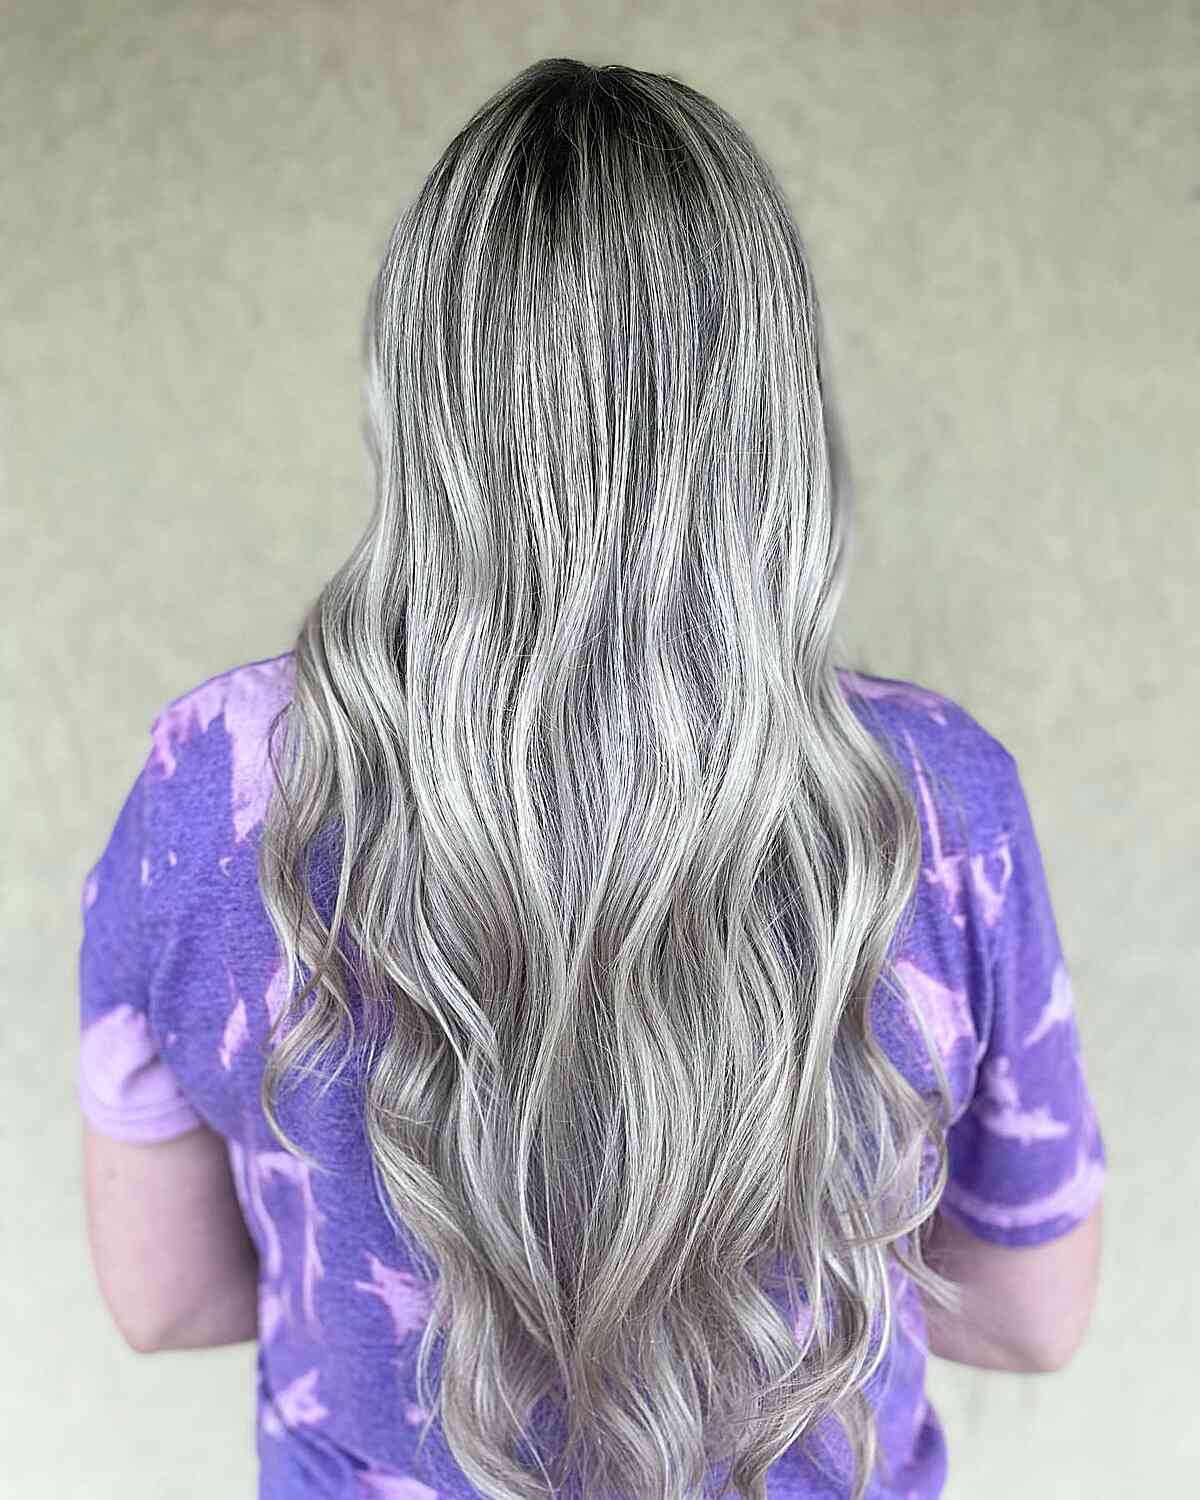 Cool Gray Icy Blonde Balayage Highlights with Root Shadow for Waist-Length Locks